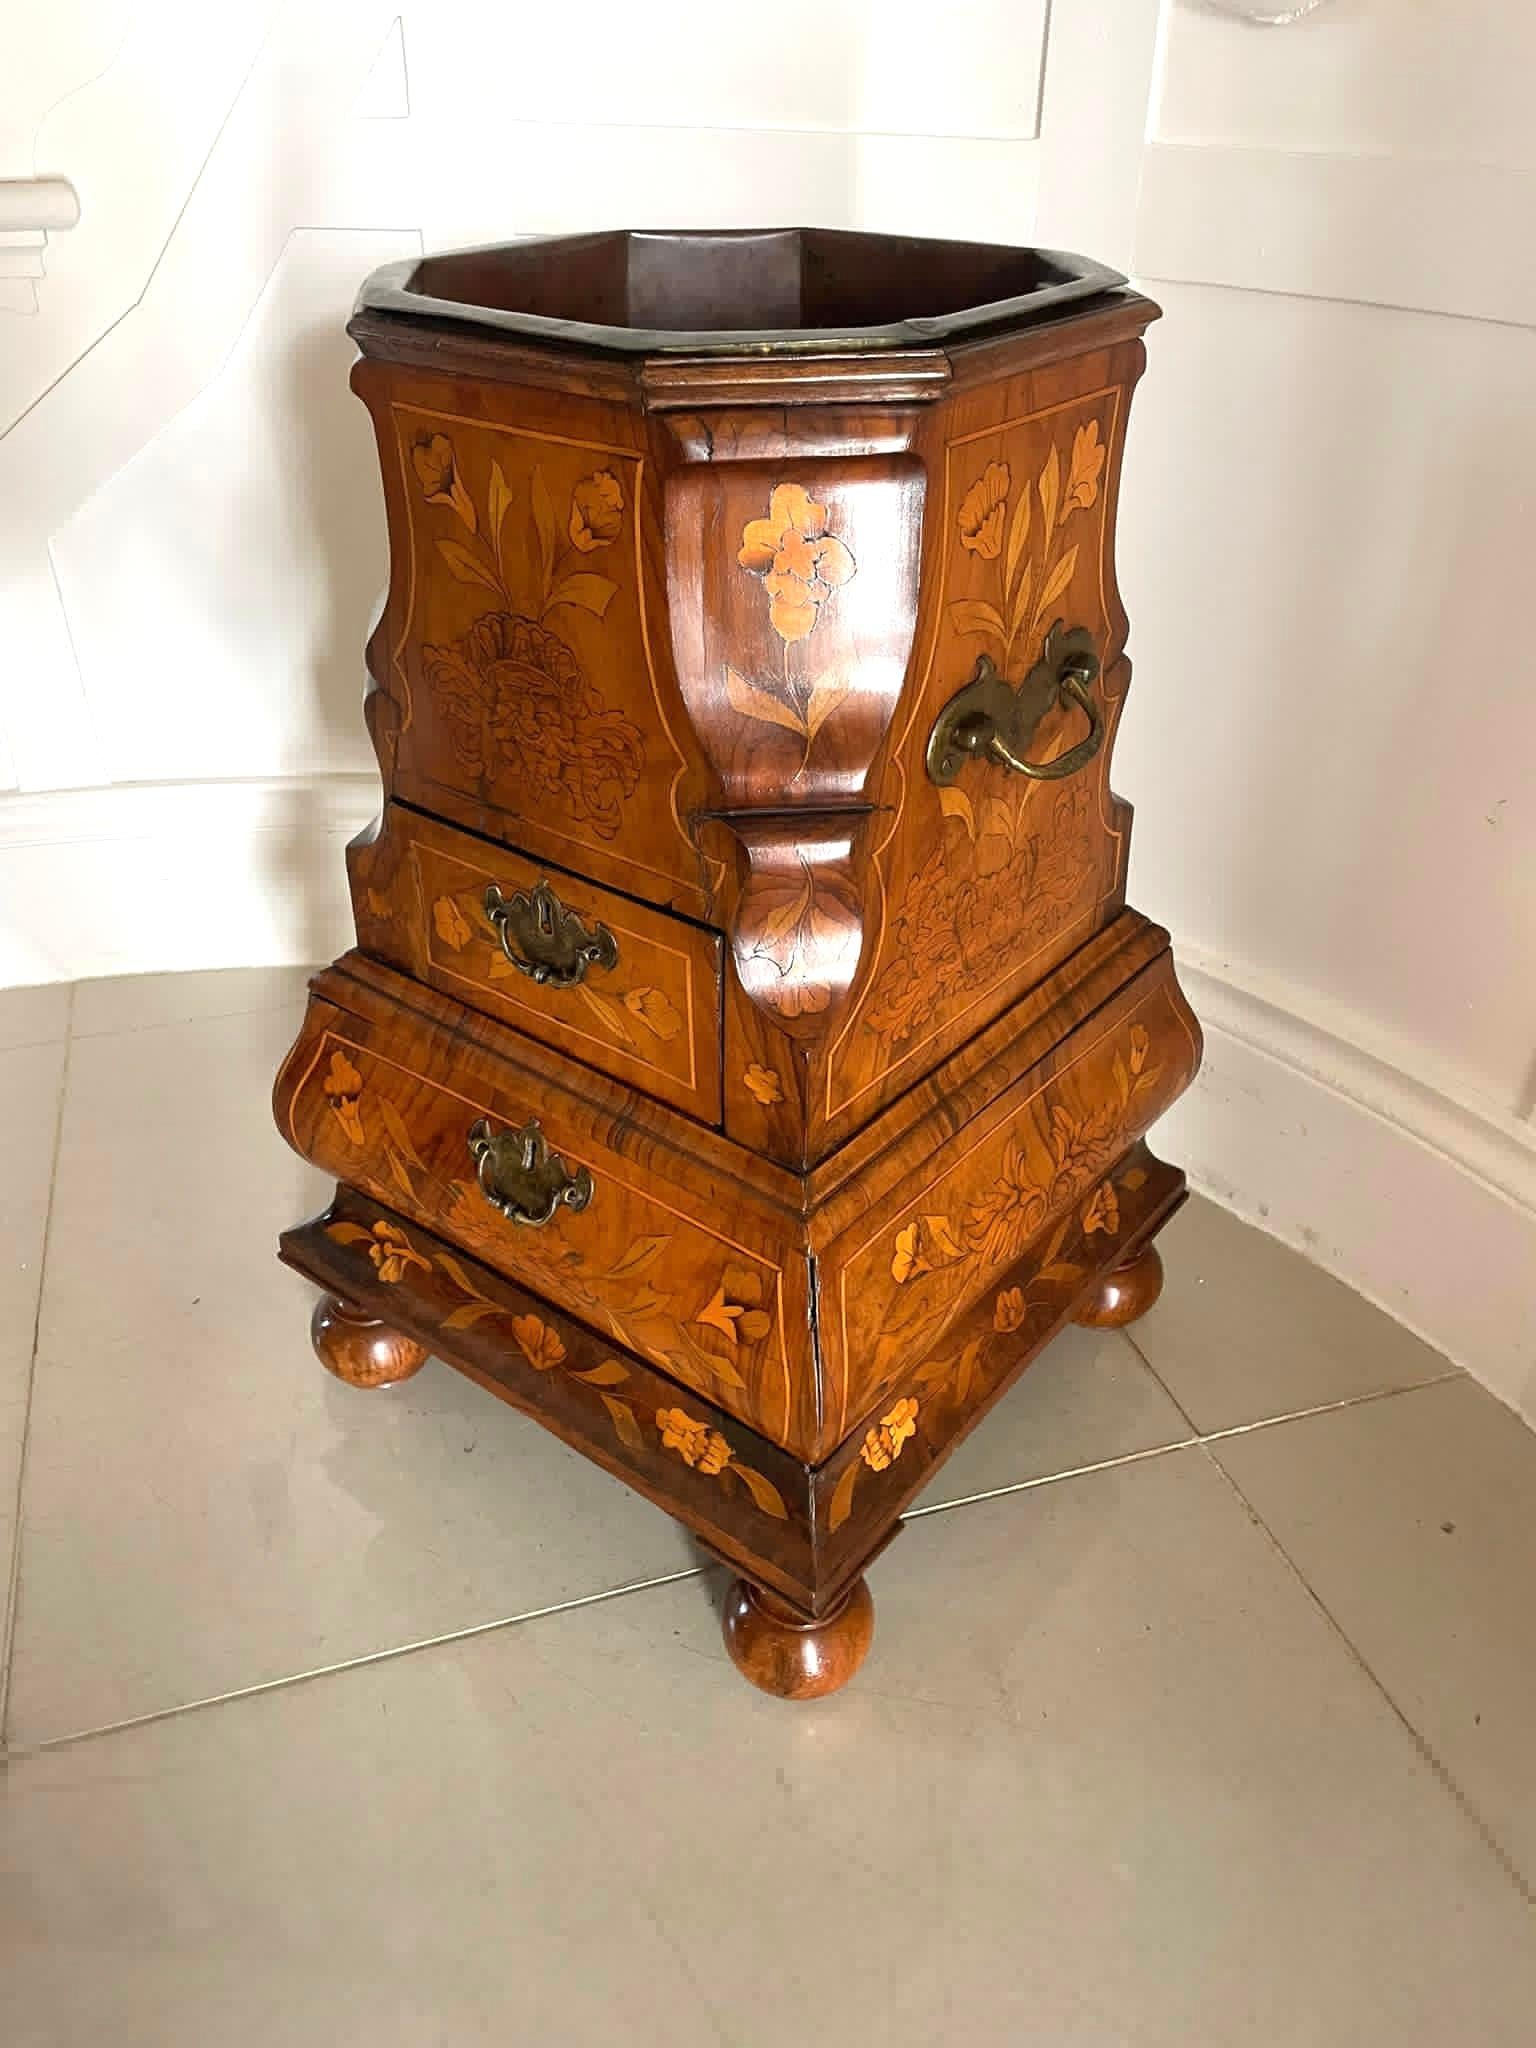 Antique Quality Floral Marquetry Burr Walnut Freestanding Champagne/Wine Cooler For Sale 9